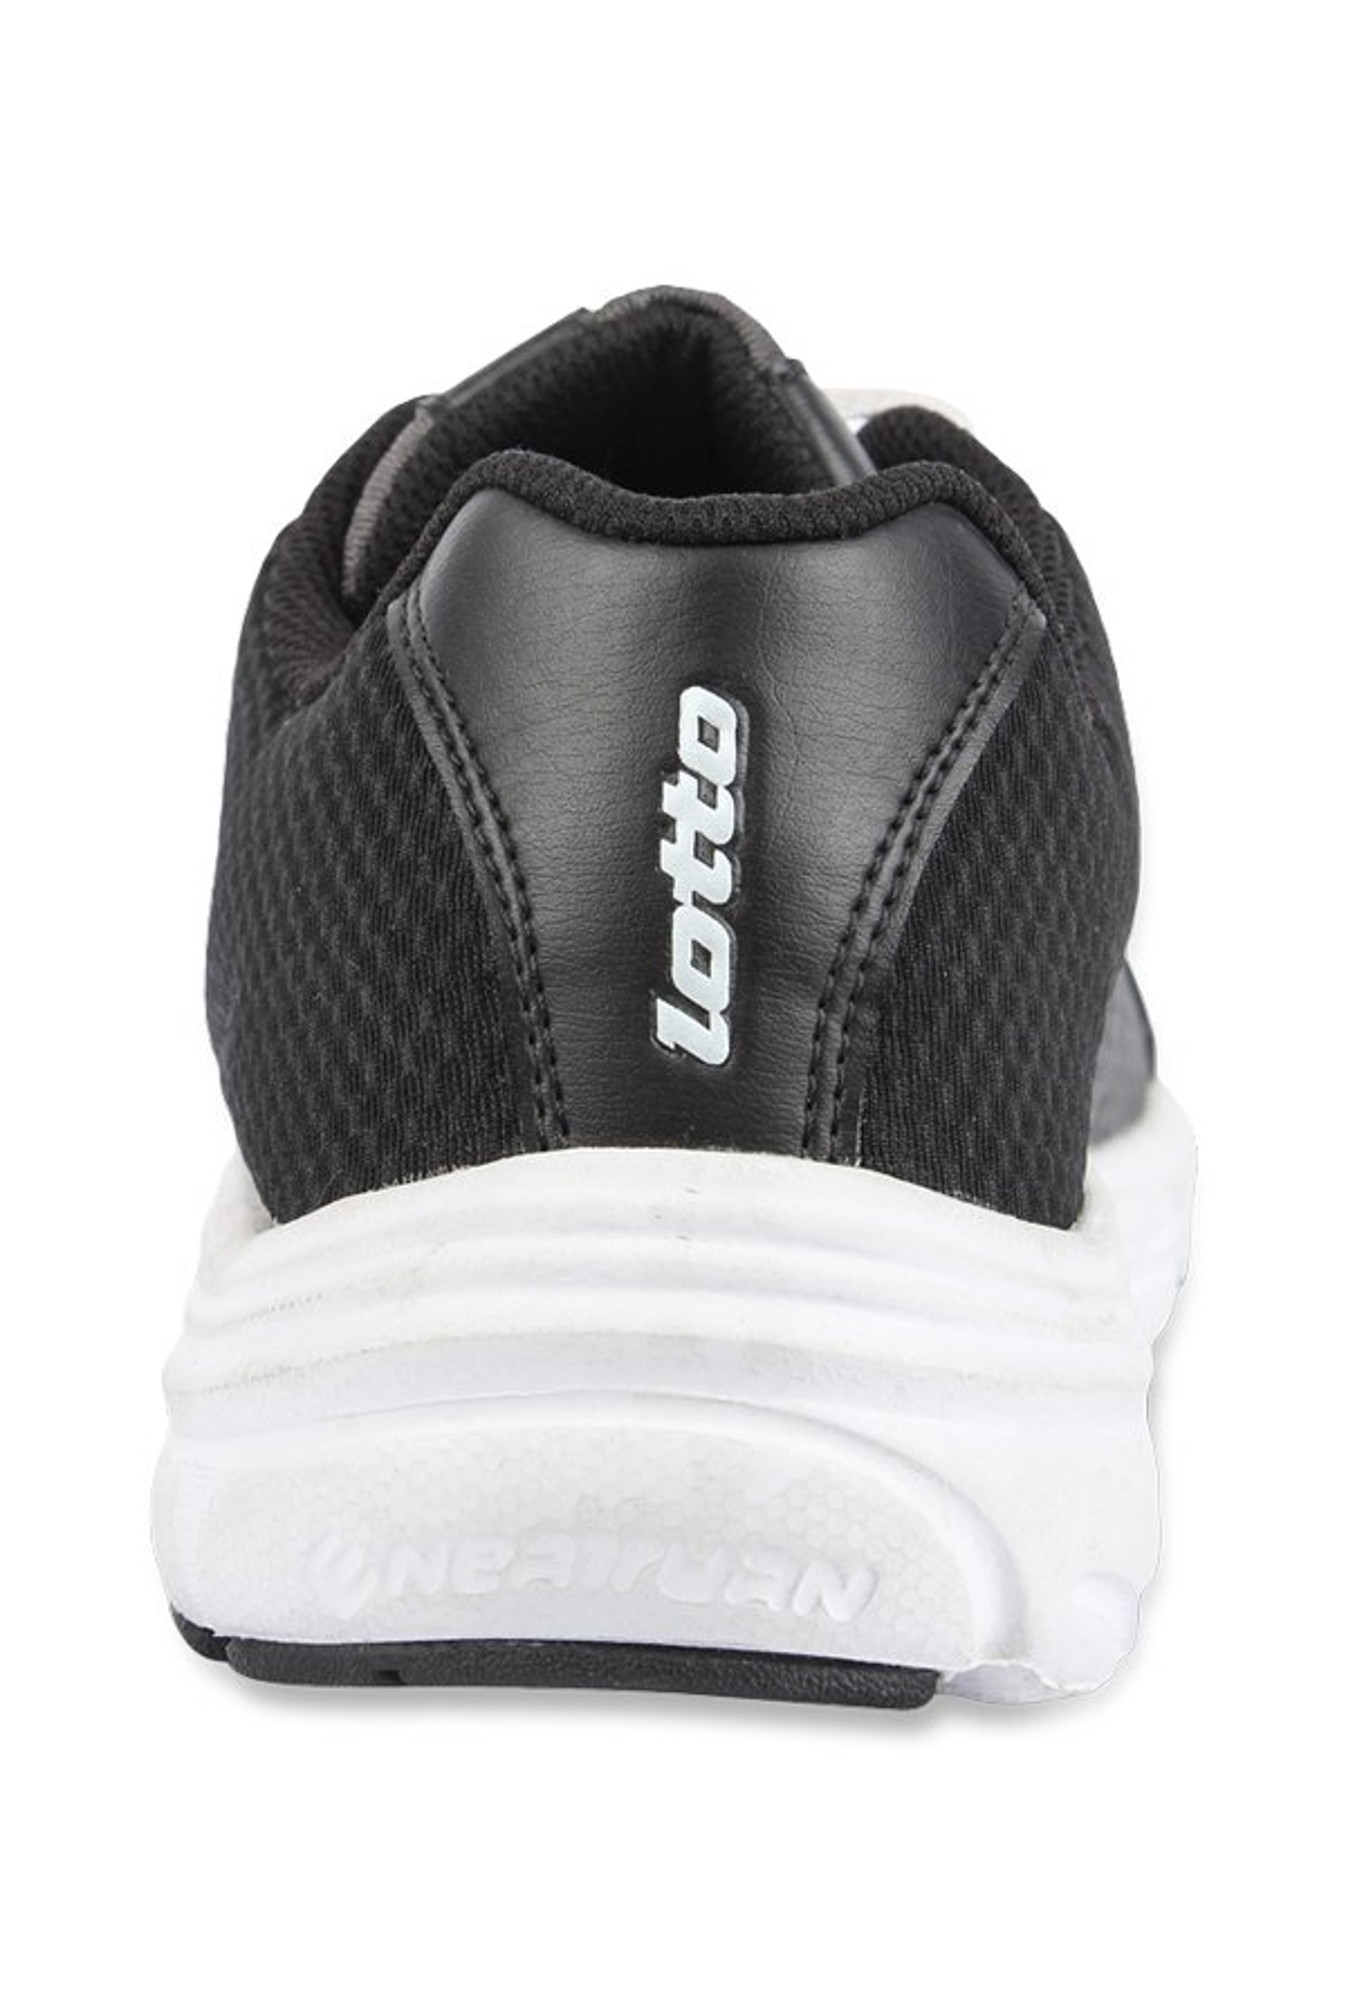 Lotto Jazz Black Running Shoes from 